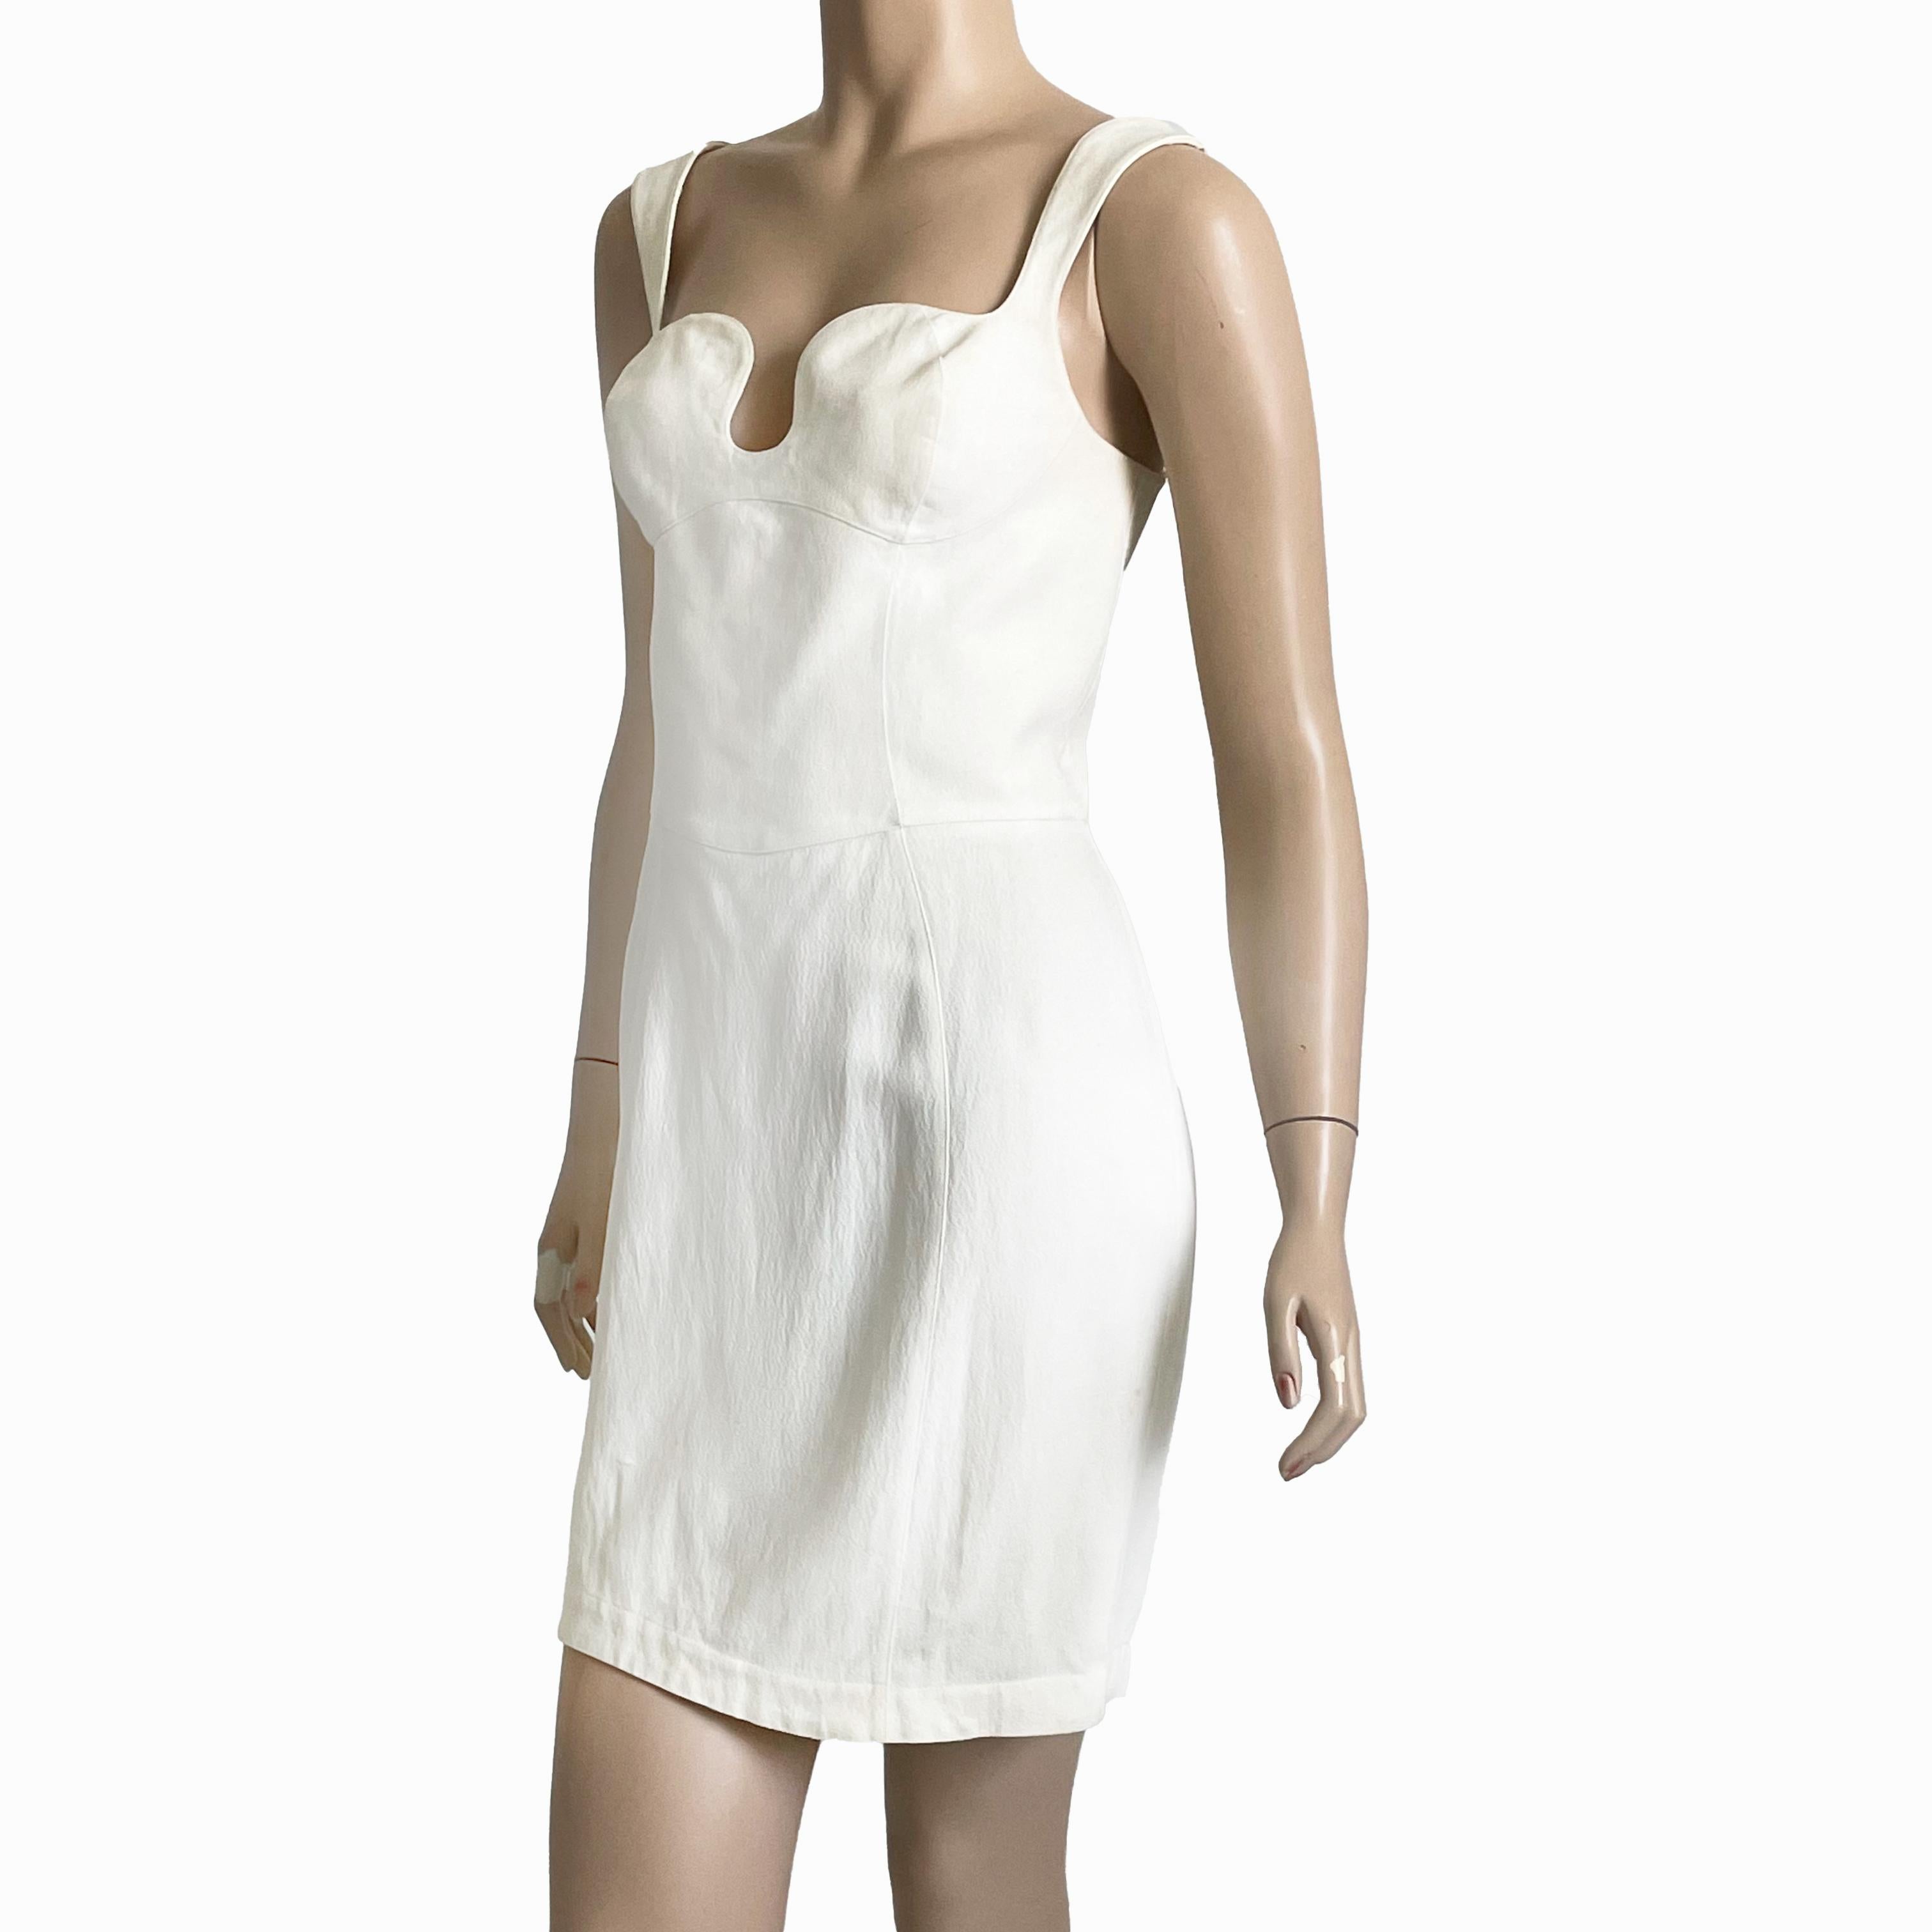 Thierry Mugler Cocktail Dress White Crepe Sculptural Chic Vintage 90s Sz 40 HTF For Sale 16